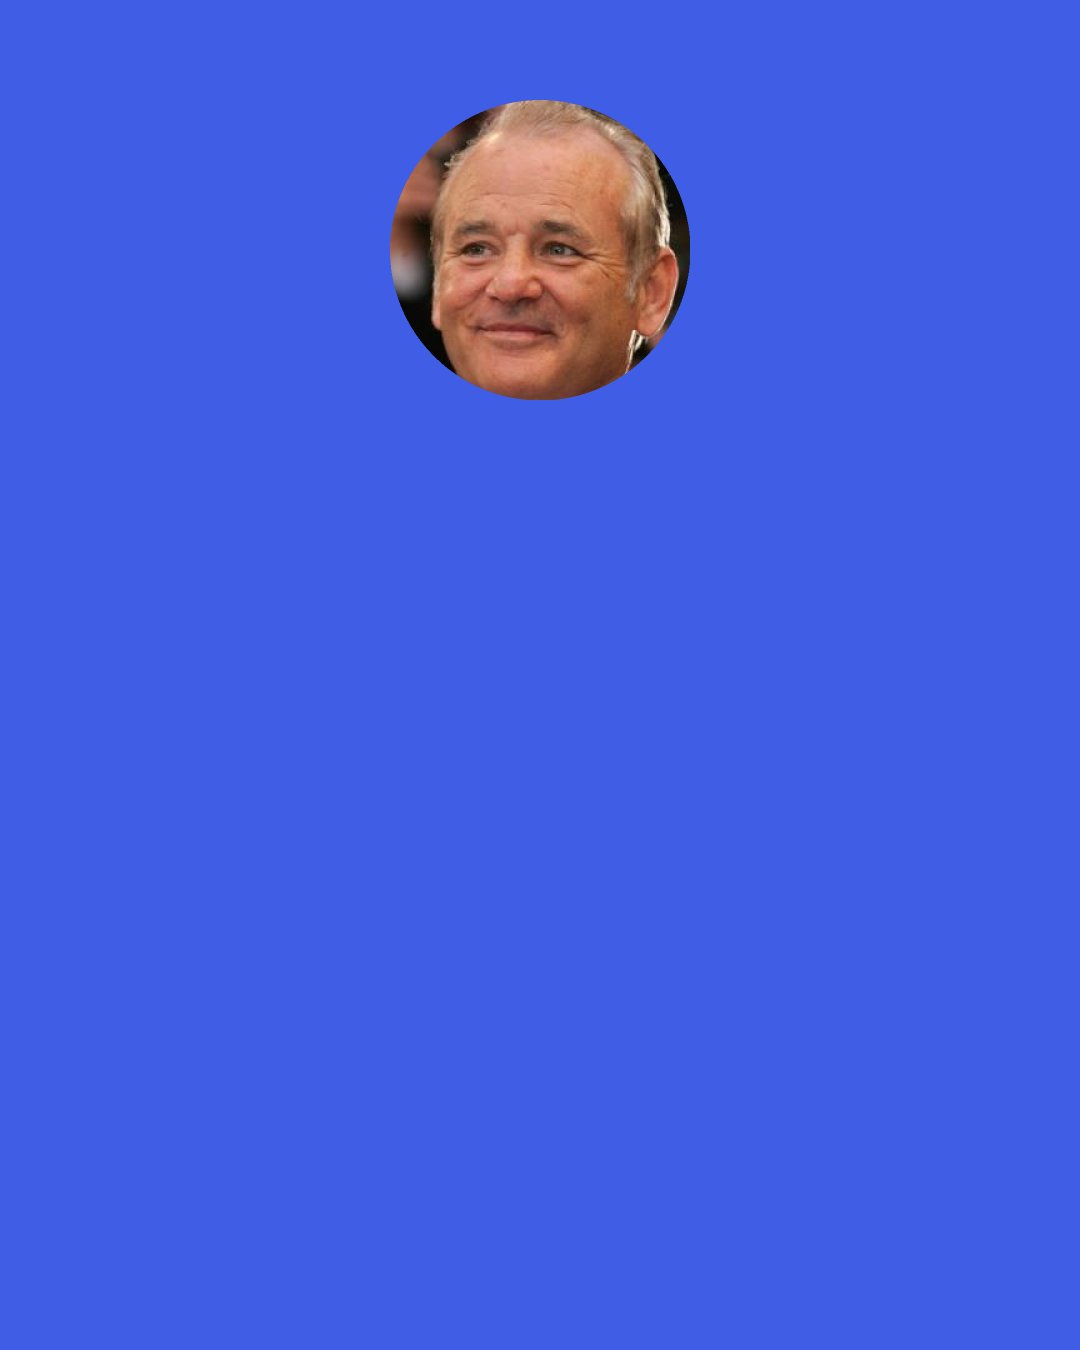 Bill Murray: To people who want to be rich and famous, I'd say, "Get rich first and see if that doesn't cover it."